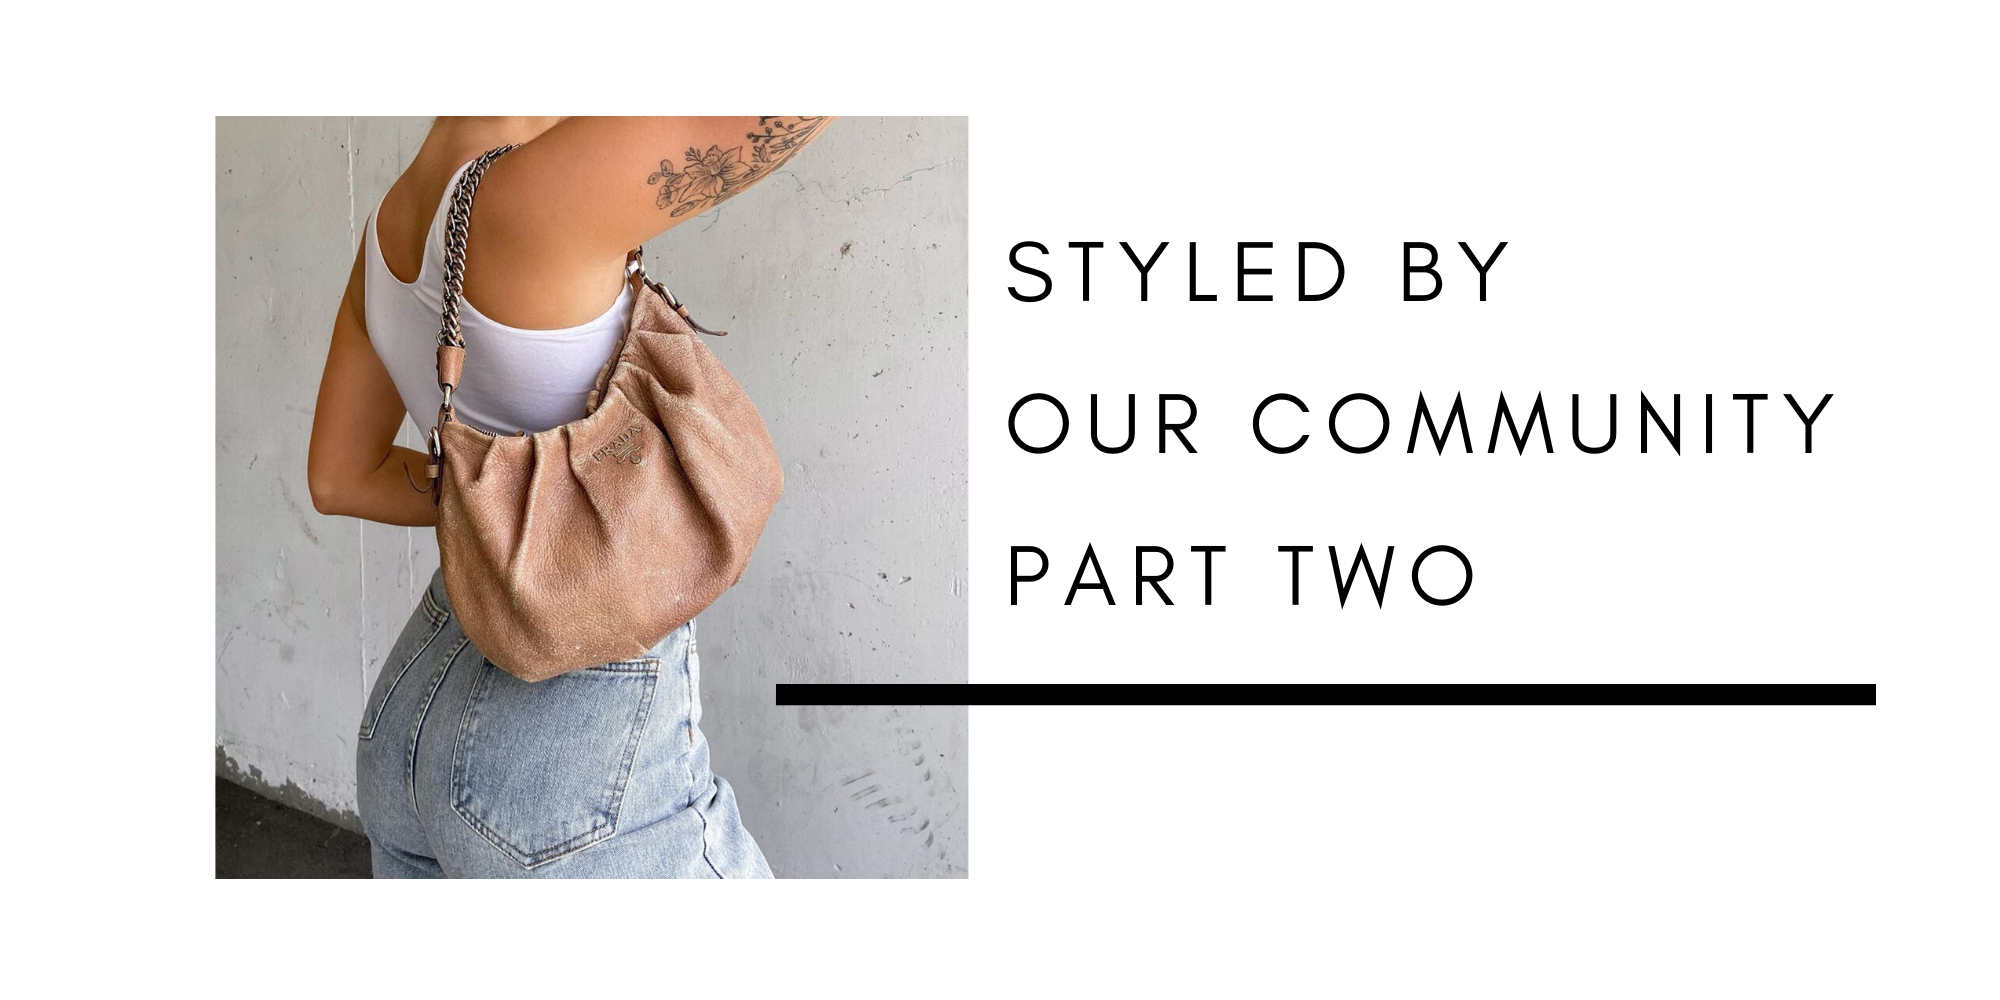 STYLED BY OUR COMMUNITY PART II